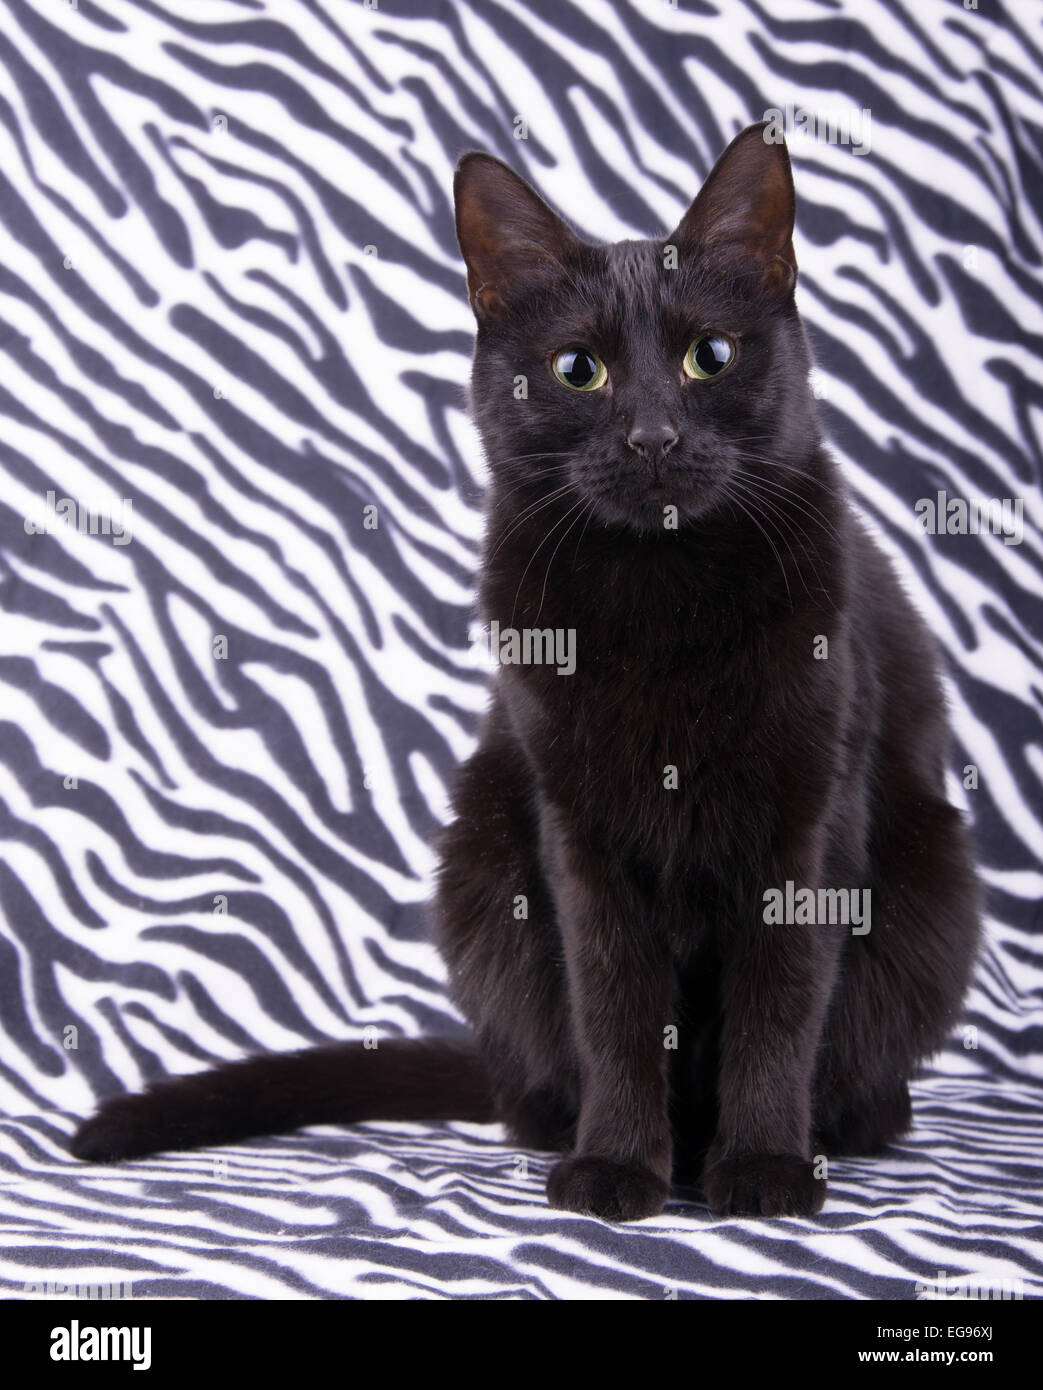 Beautiful black cat sitting against a zebra striped background, looking attentively at the viewer Stock Photo